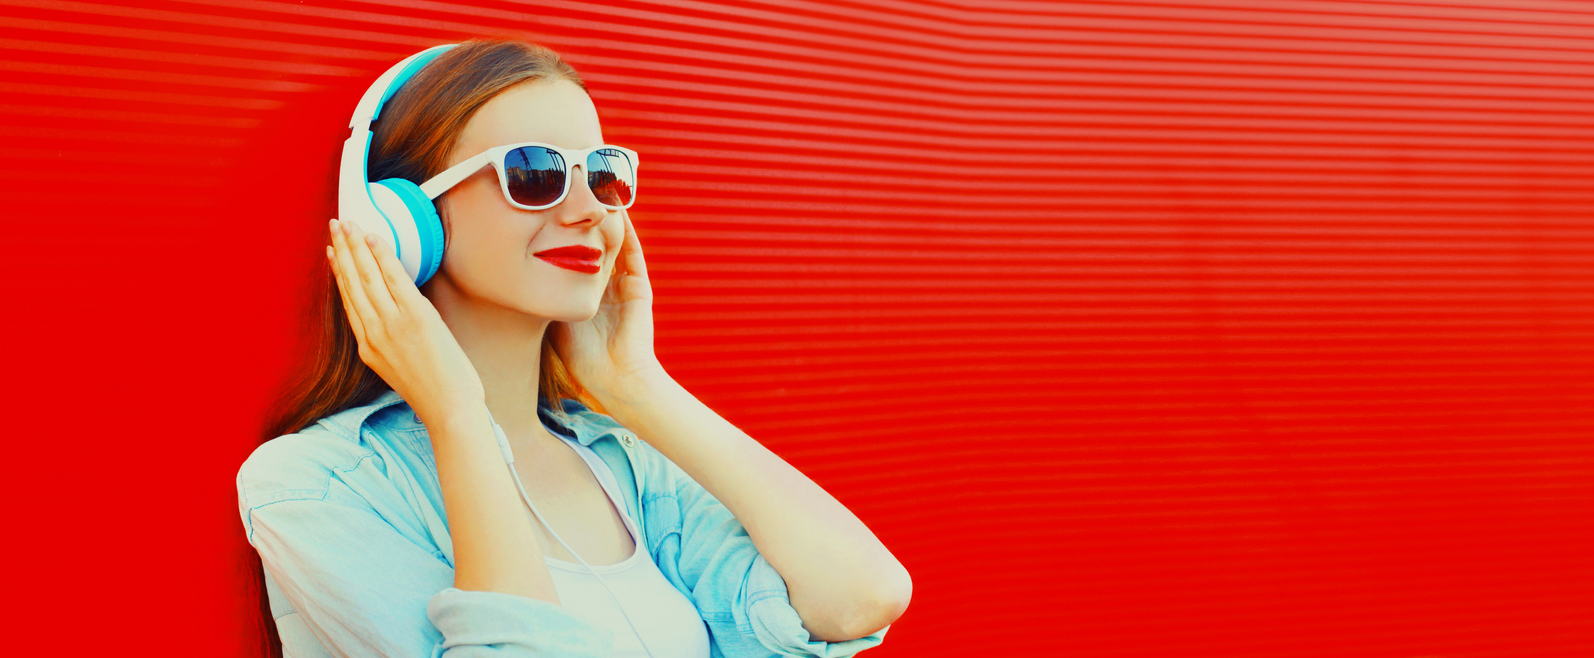 Woman in a blue shirt with headphones on a red background.